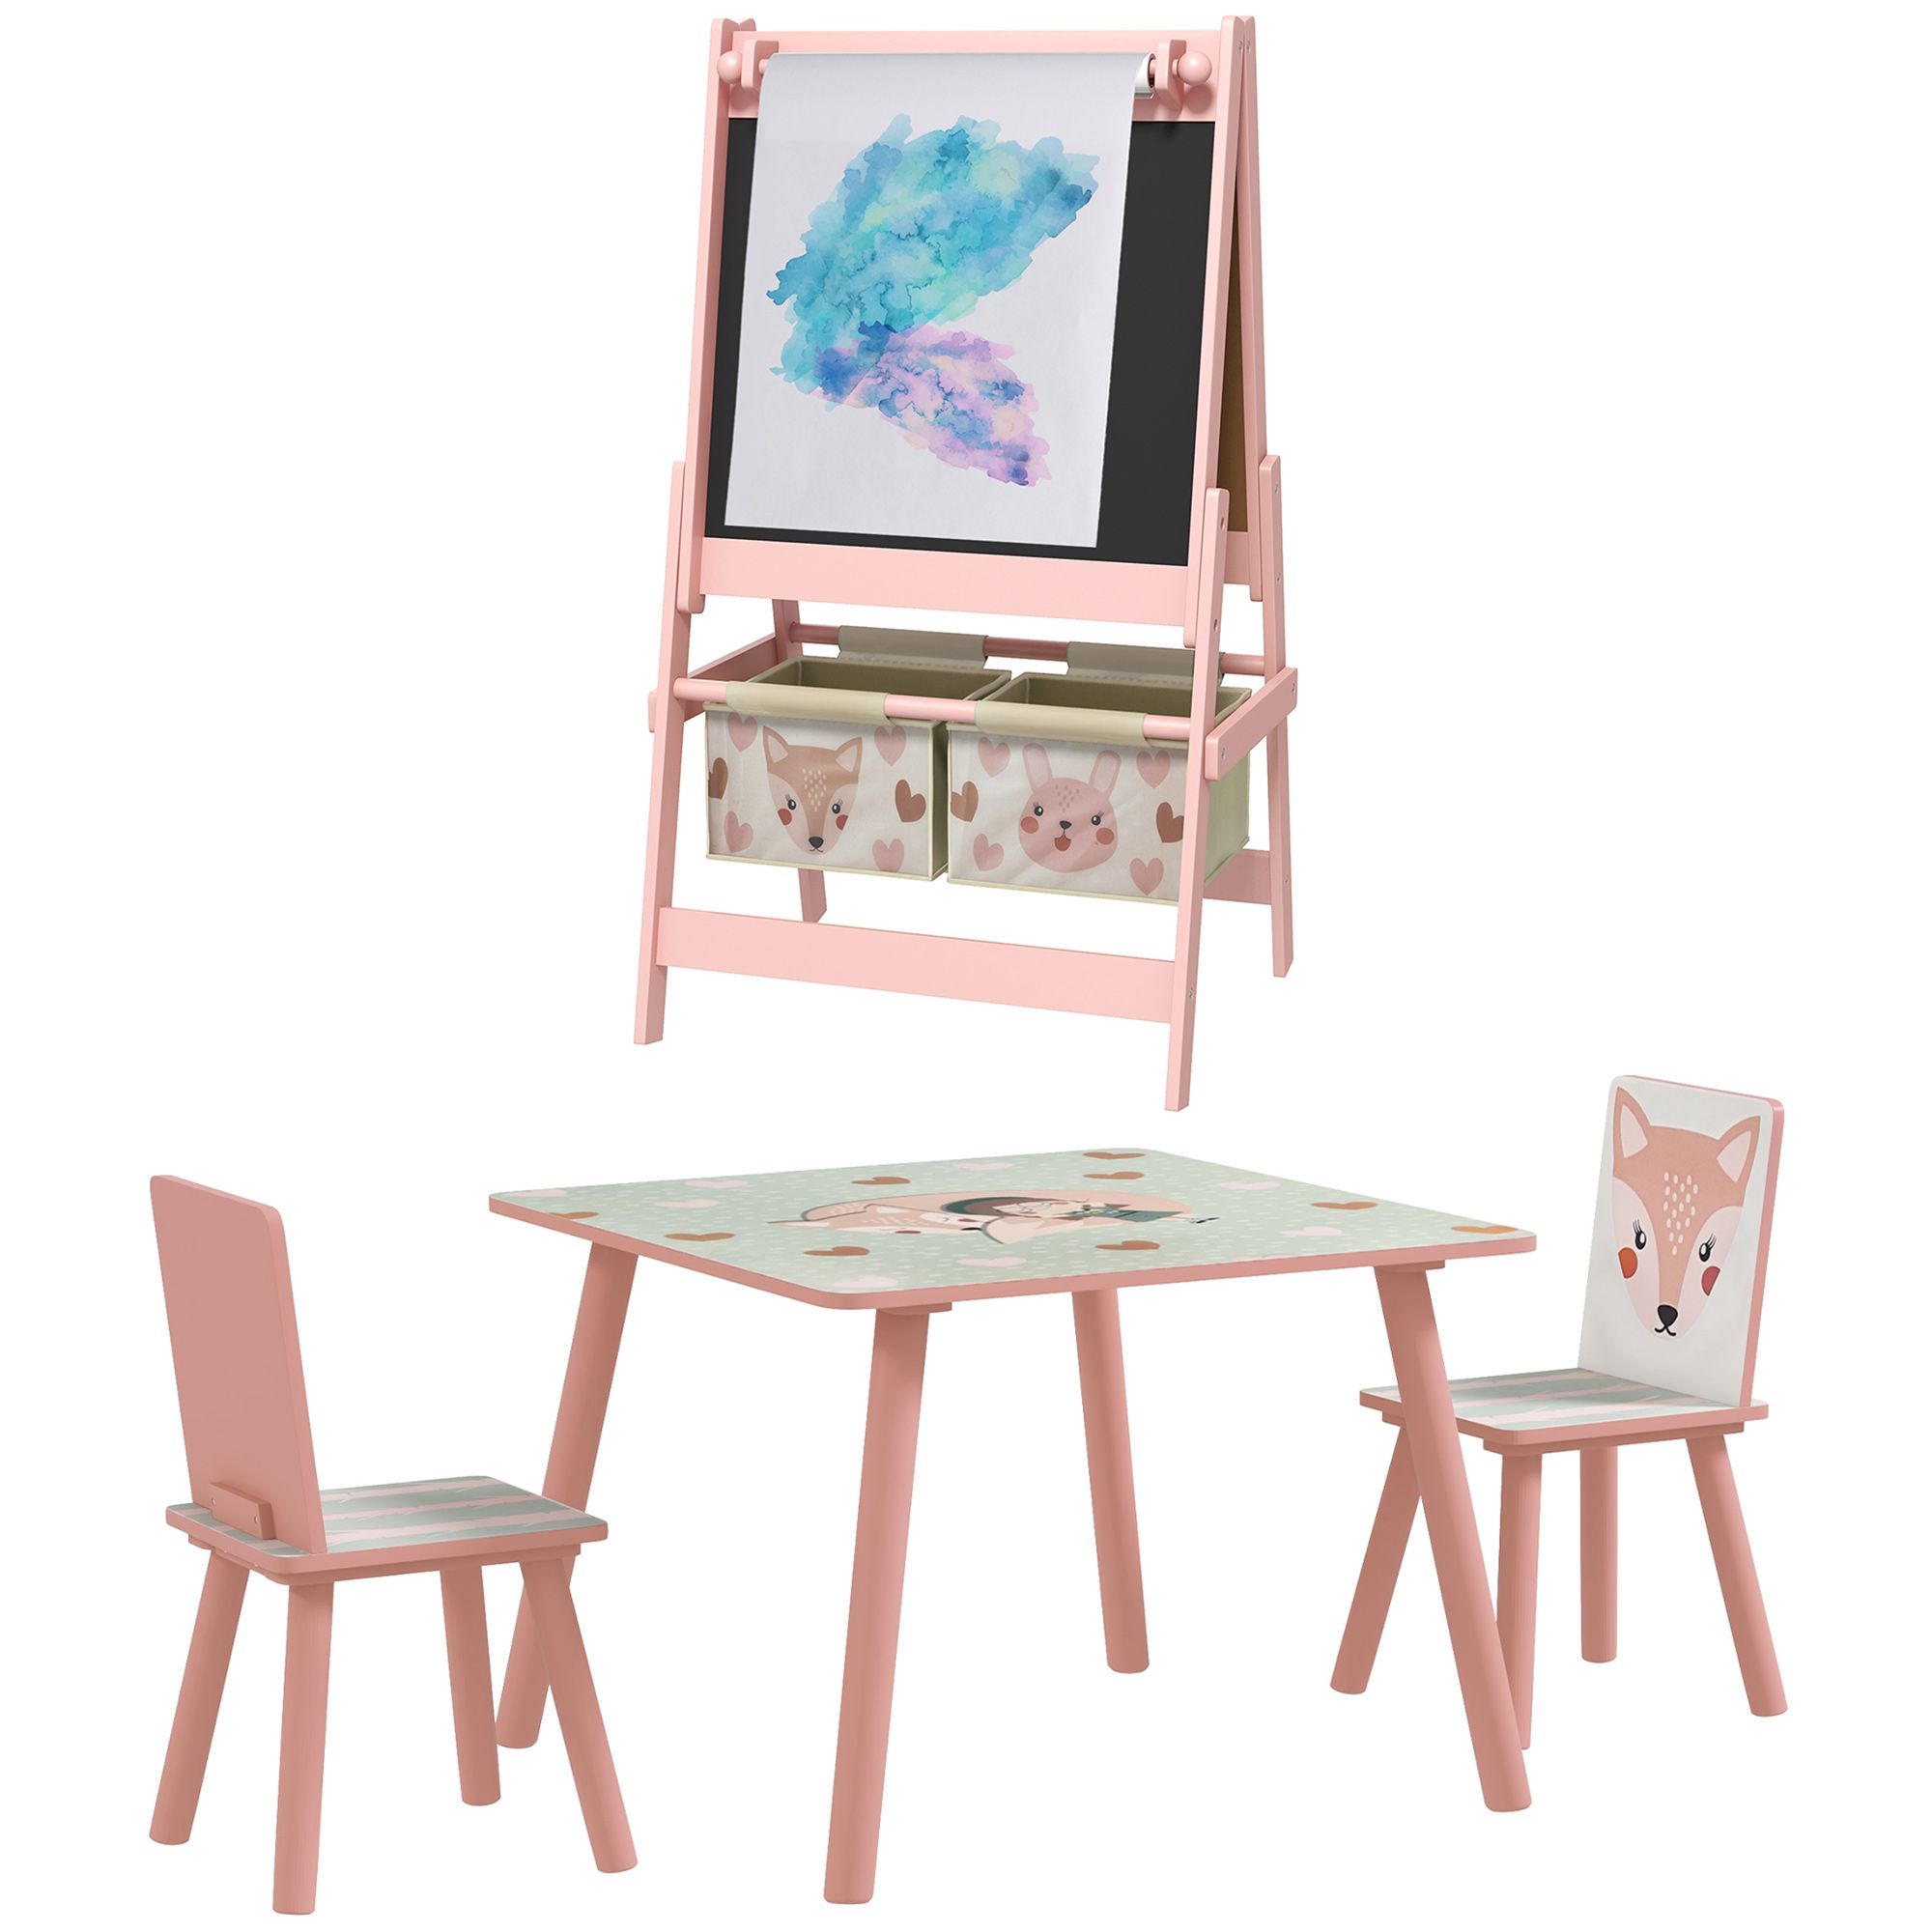 Zonekiz Kids Table And Chair Set And Kids Easel With Paper Roll, Storage Baskets, Kids Activity Furniture Set, Pink